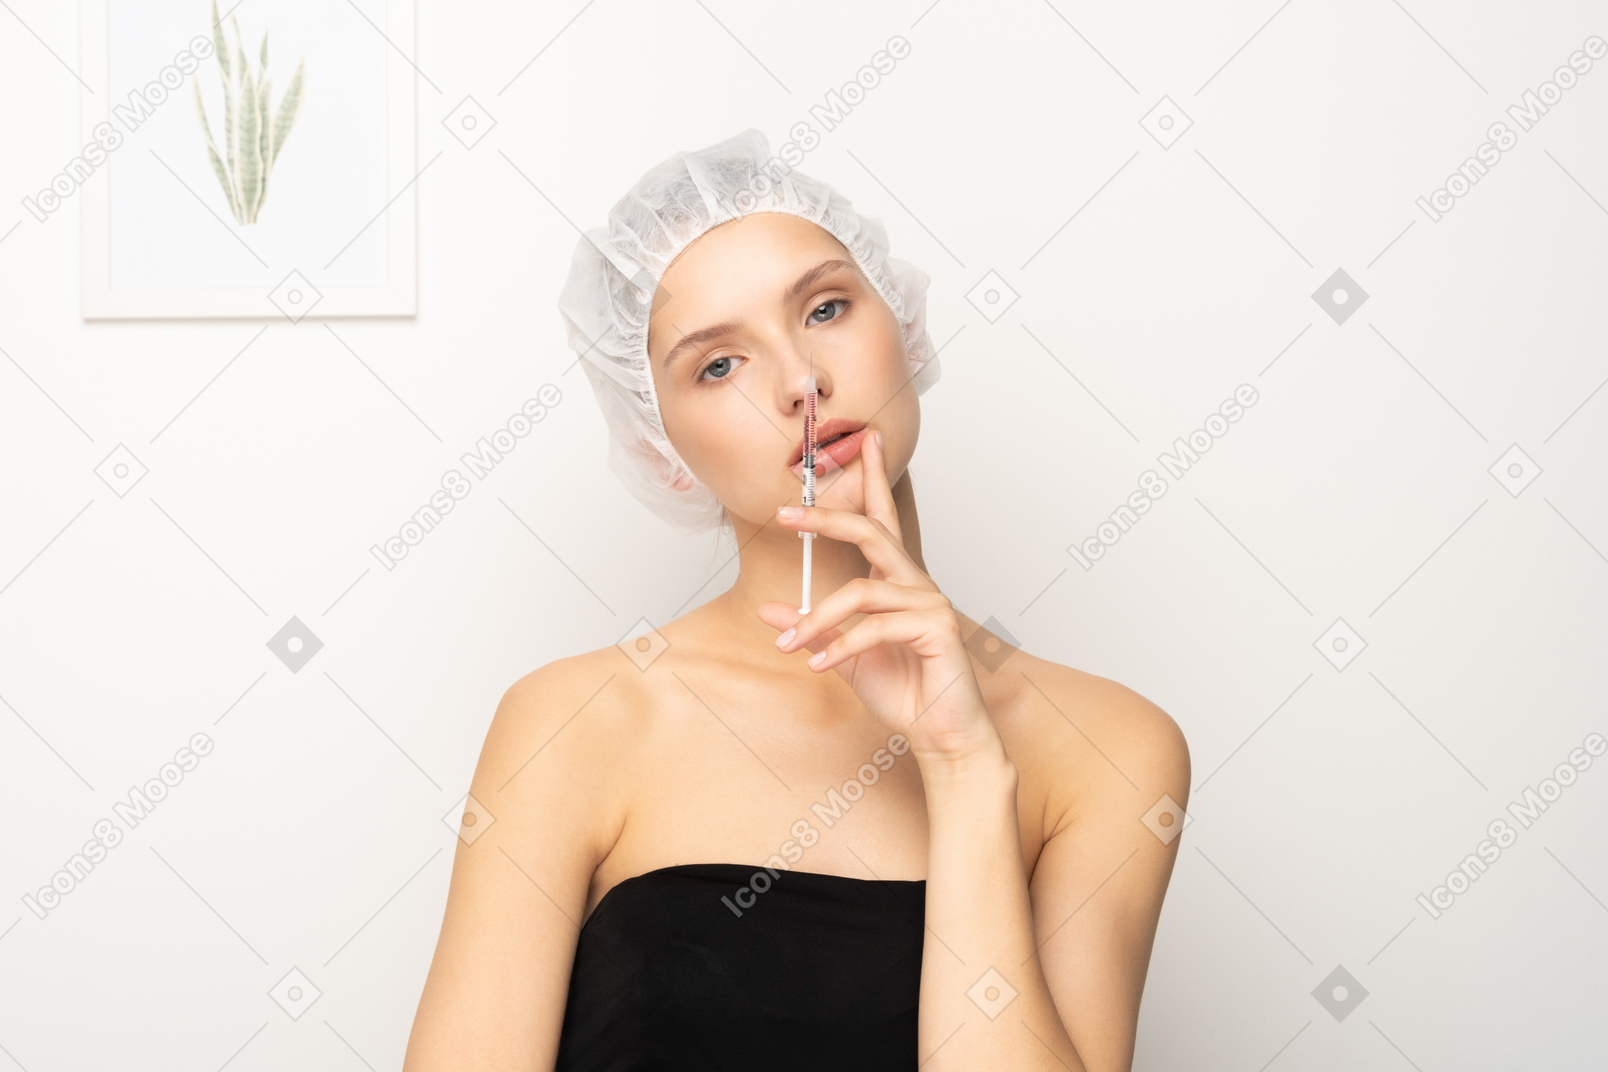 Woman standing with syringe and looking at camera